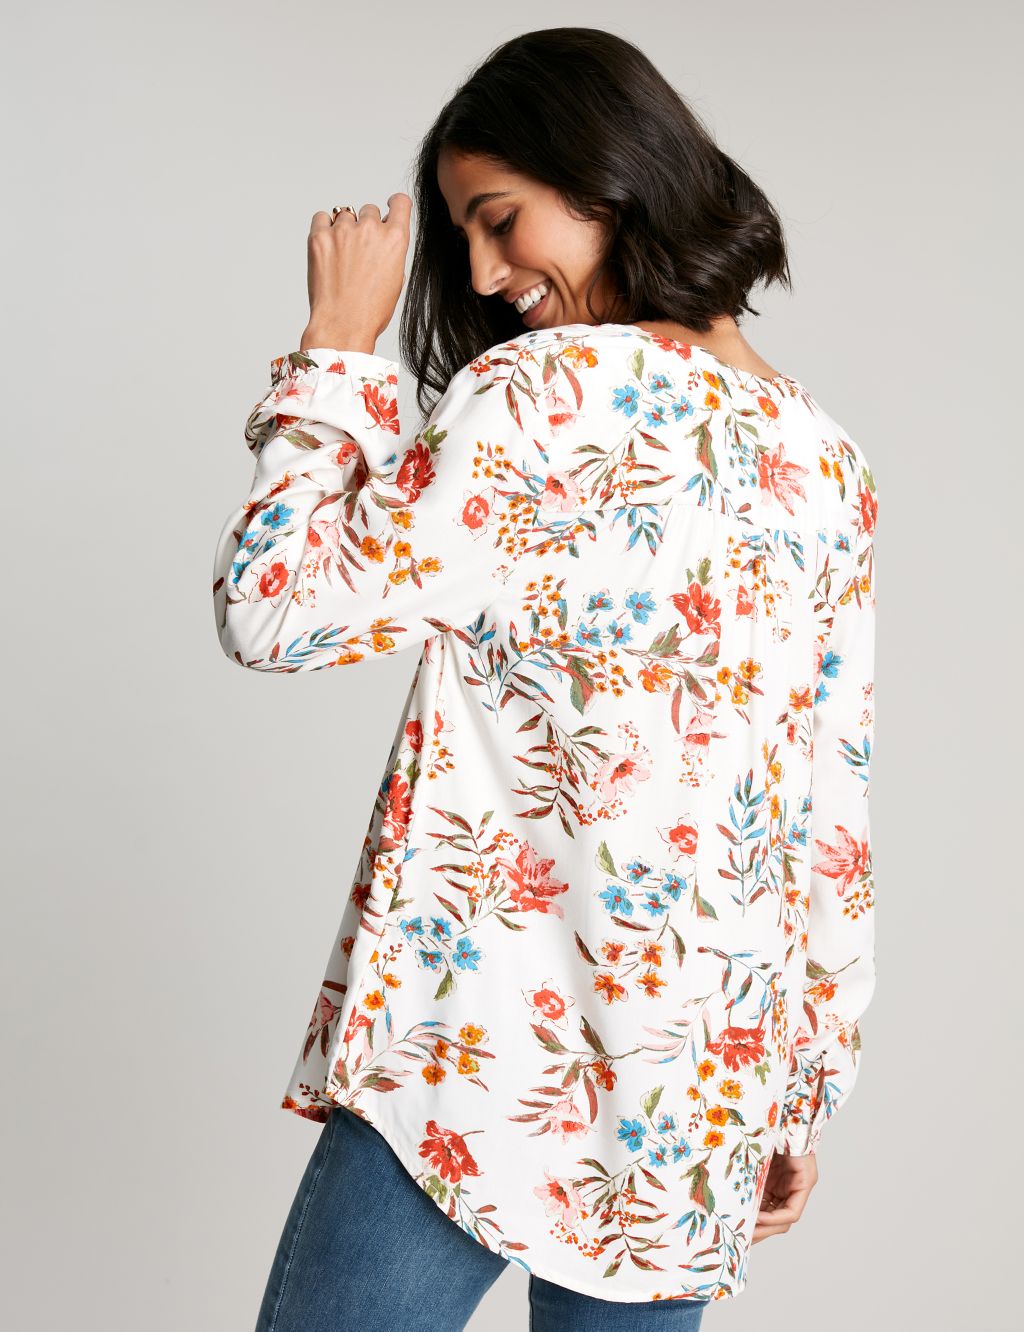 Floral Round Neck Popover Blouse image 2